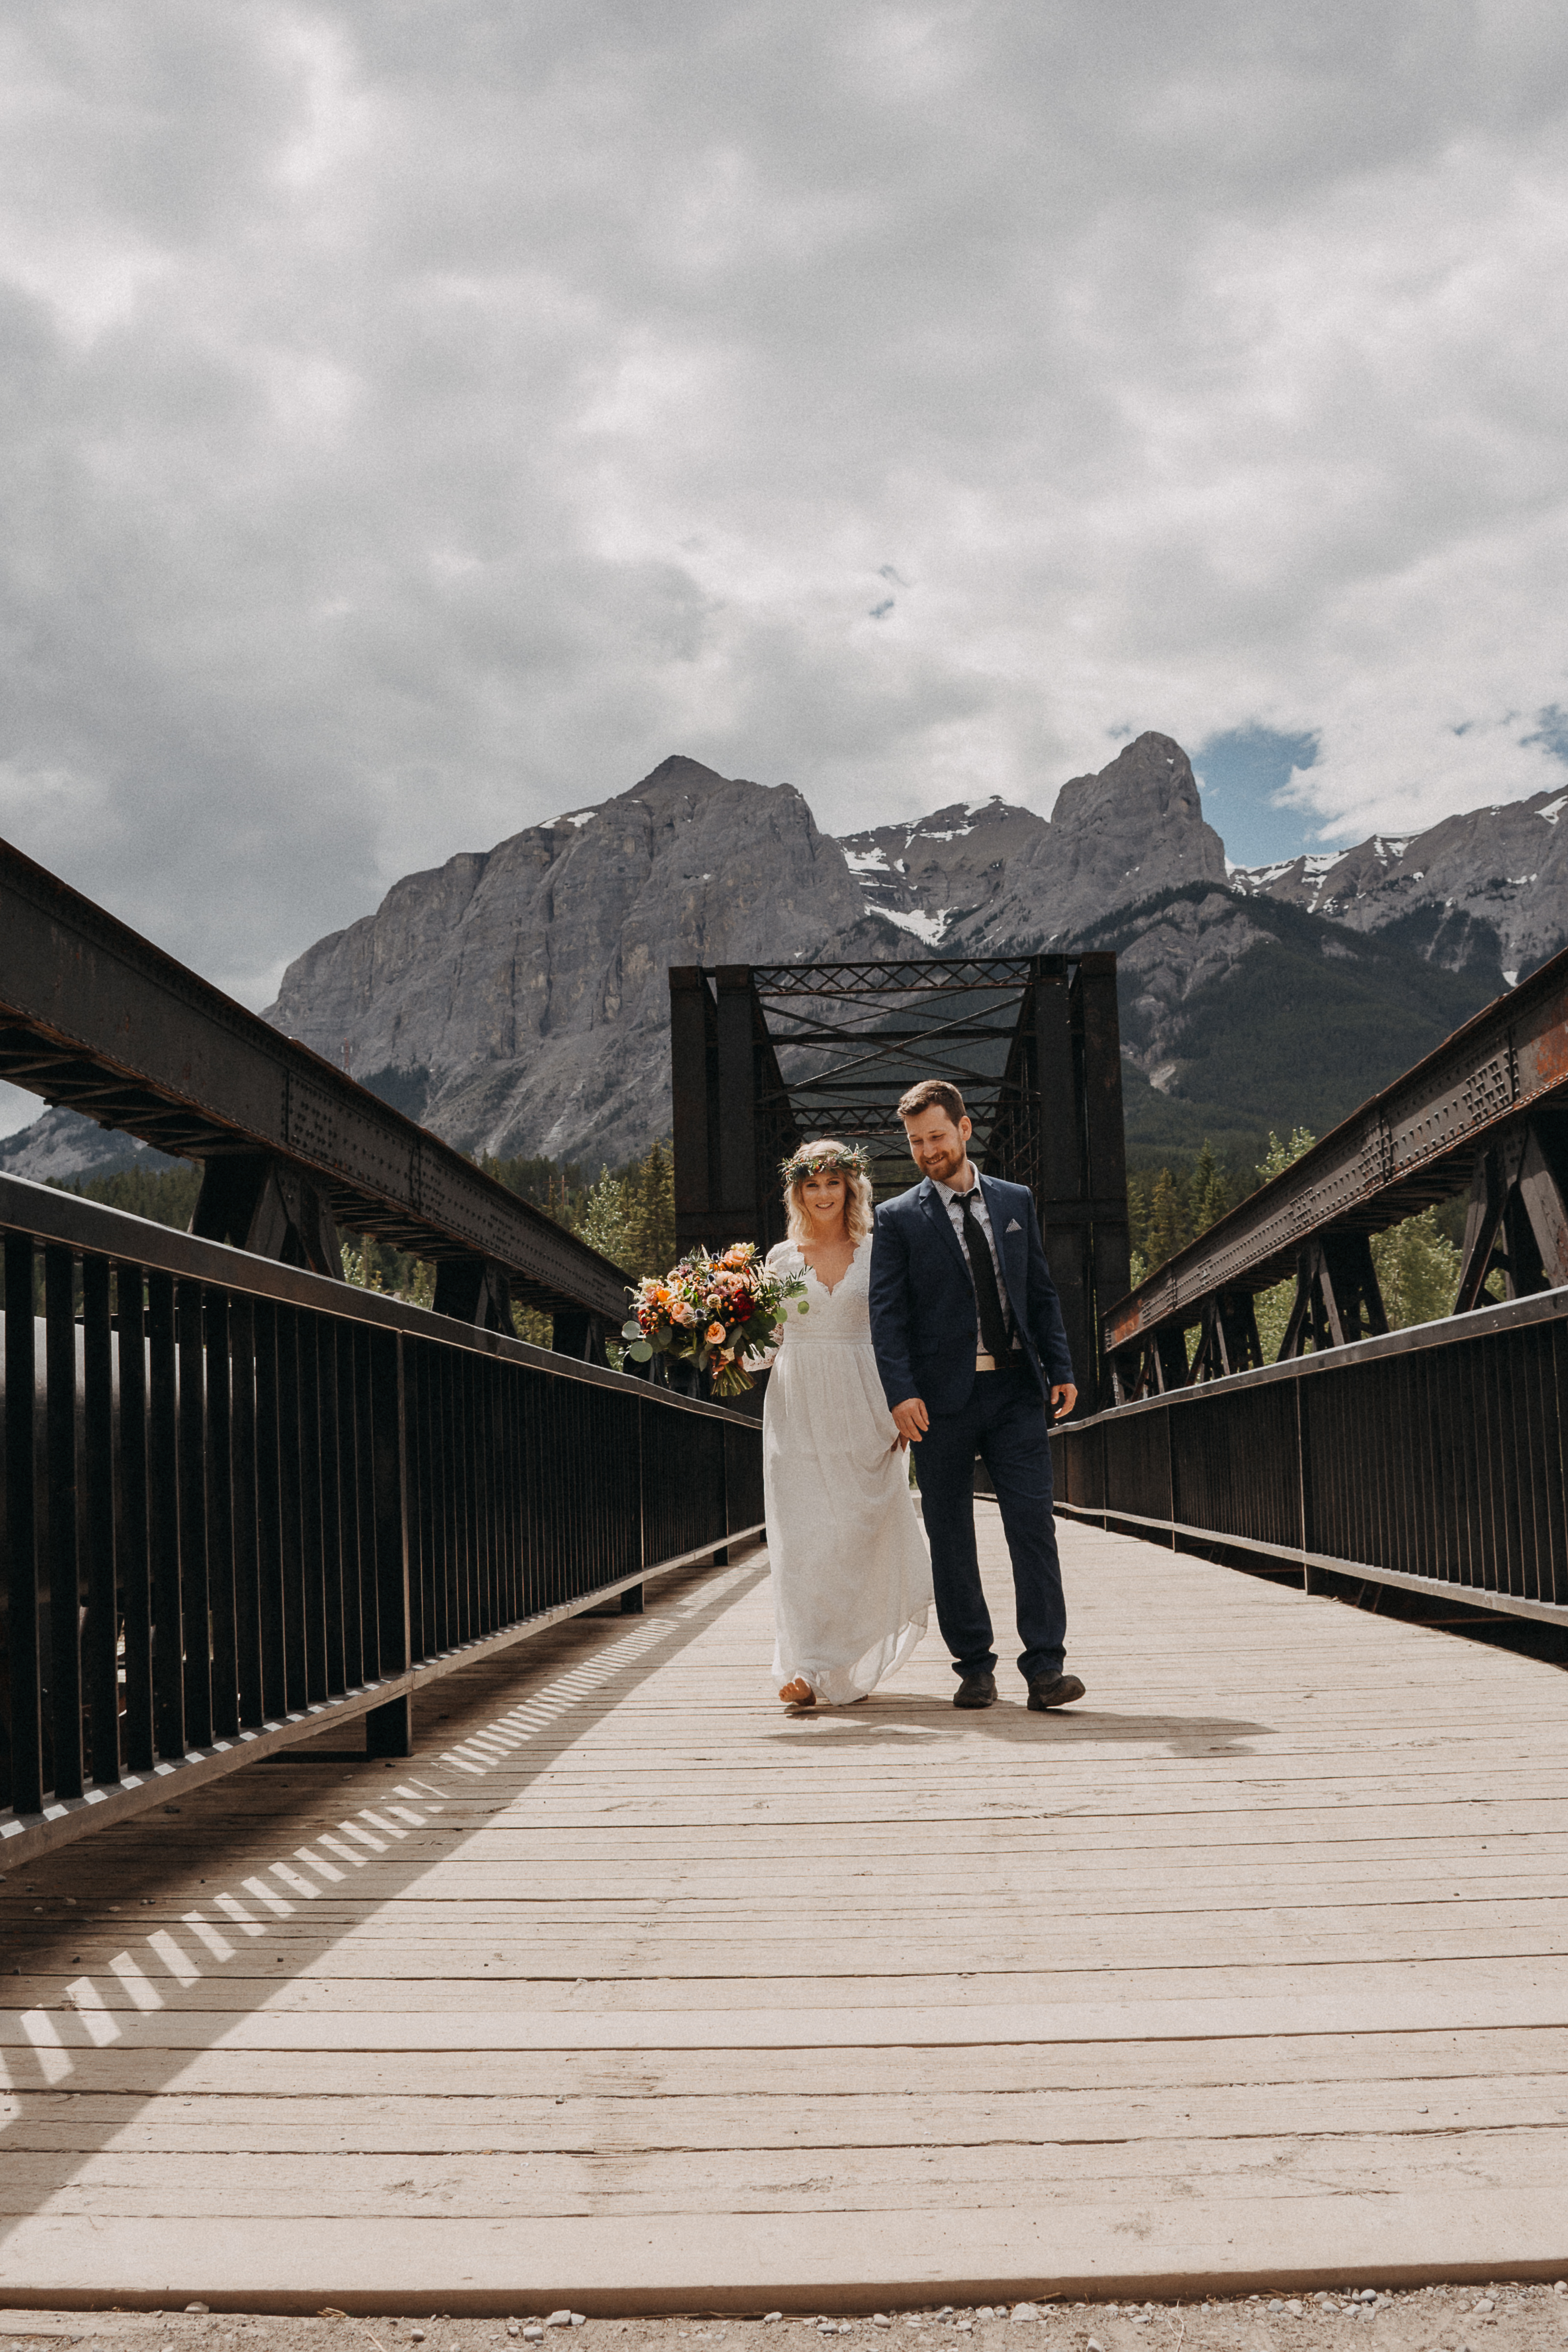 The bride and groom walking towards the camera, hand in hand, on the engine bridge in Canmore, Alberta